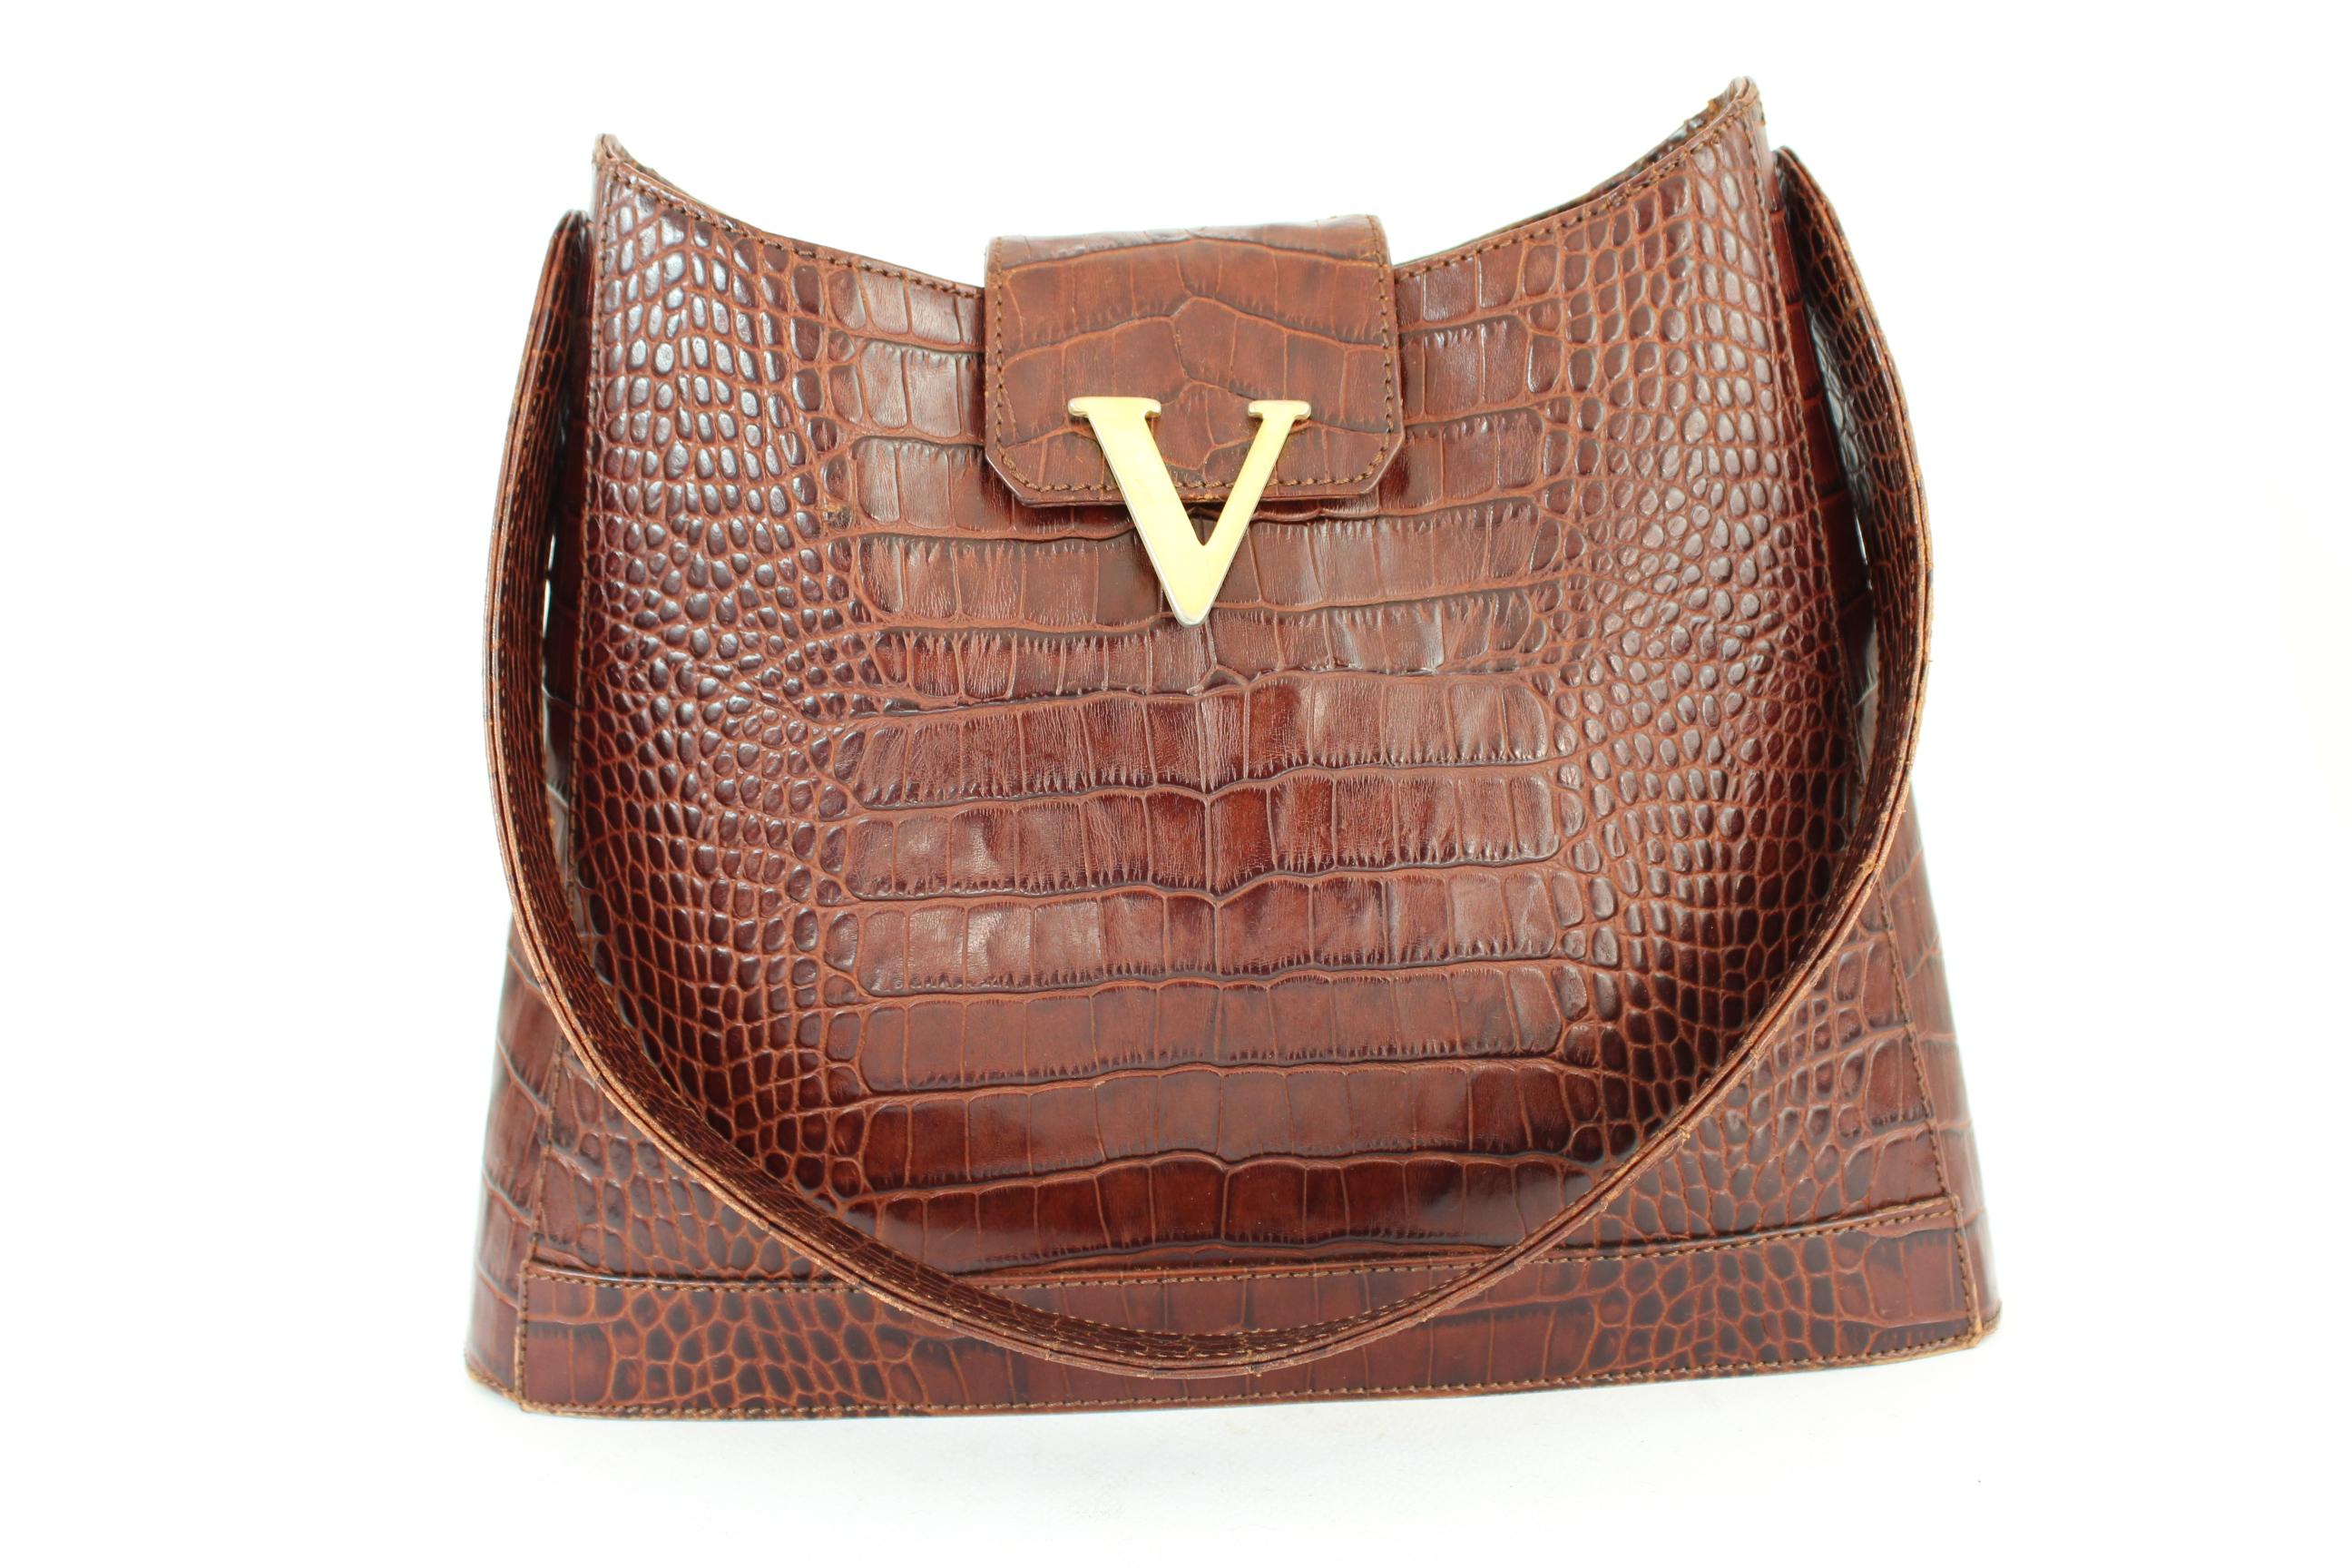 Valentino Les Sacs vintage 90s bag . Rigid shoulder bag, 100% leather crocodile print, brown color, inserts gold color and clip closure. Made in Italy. Very good vintage condition, some signs of wear on the edge.

Height: 22 cm 
Length: 30 cm